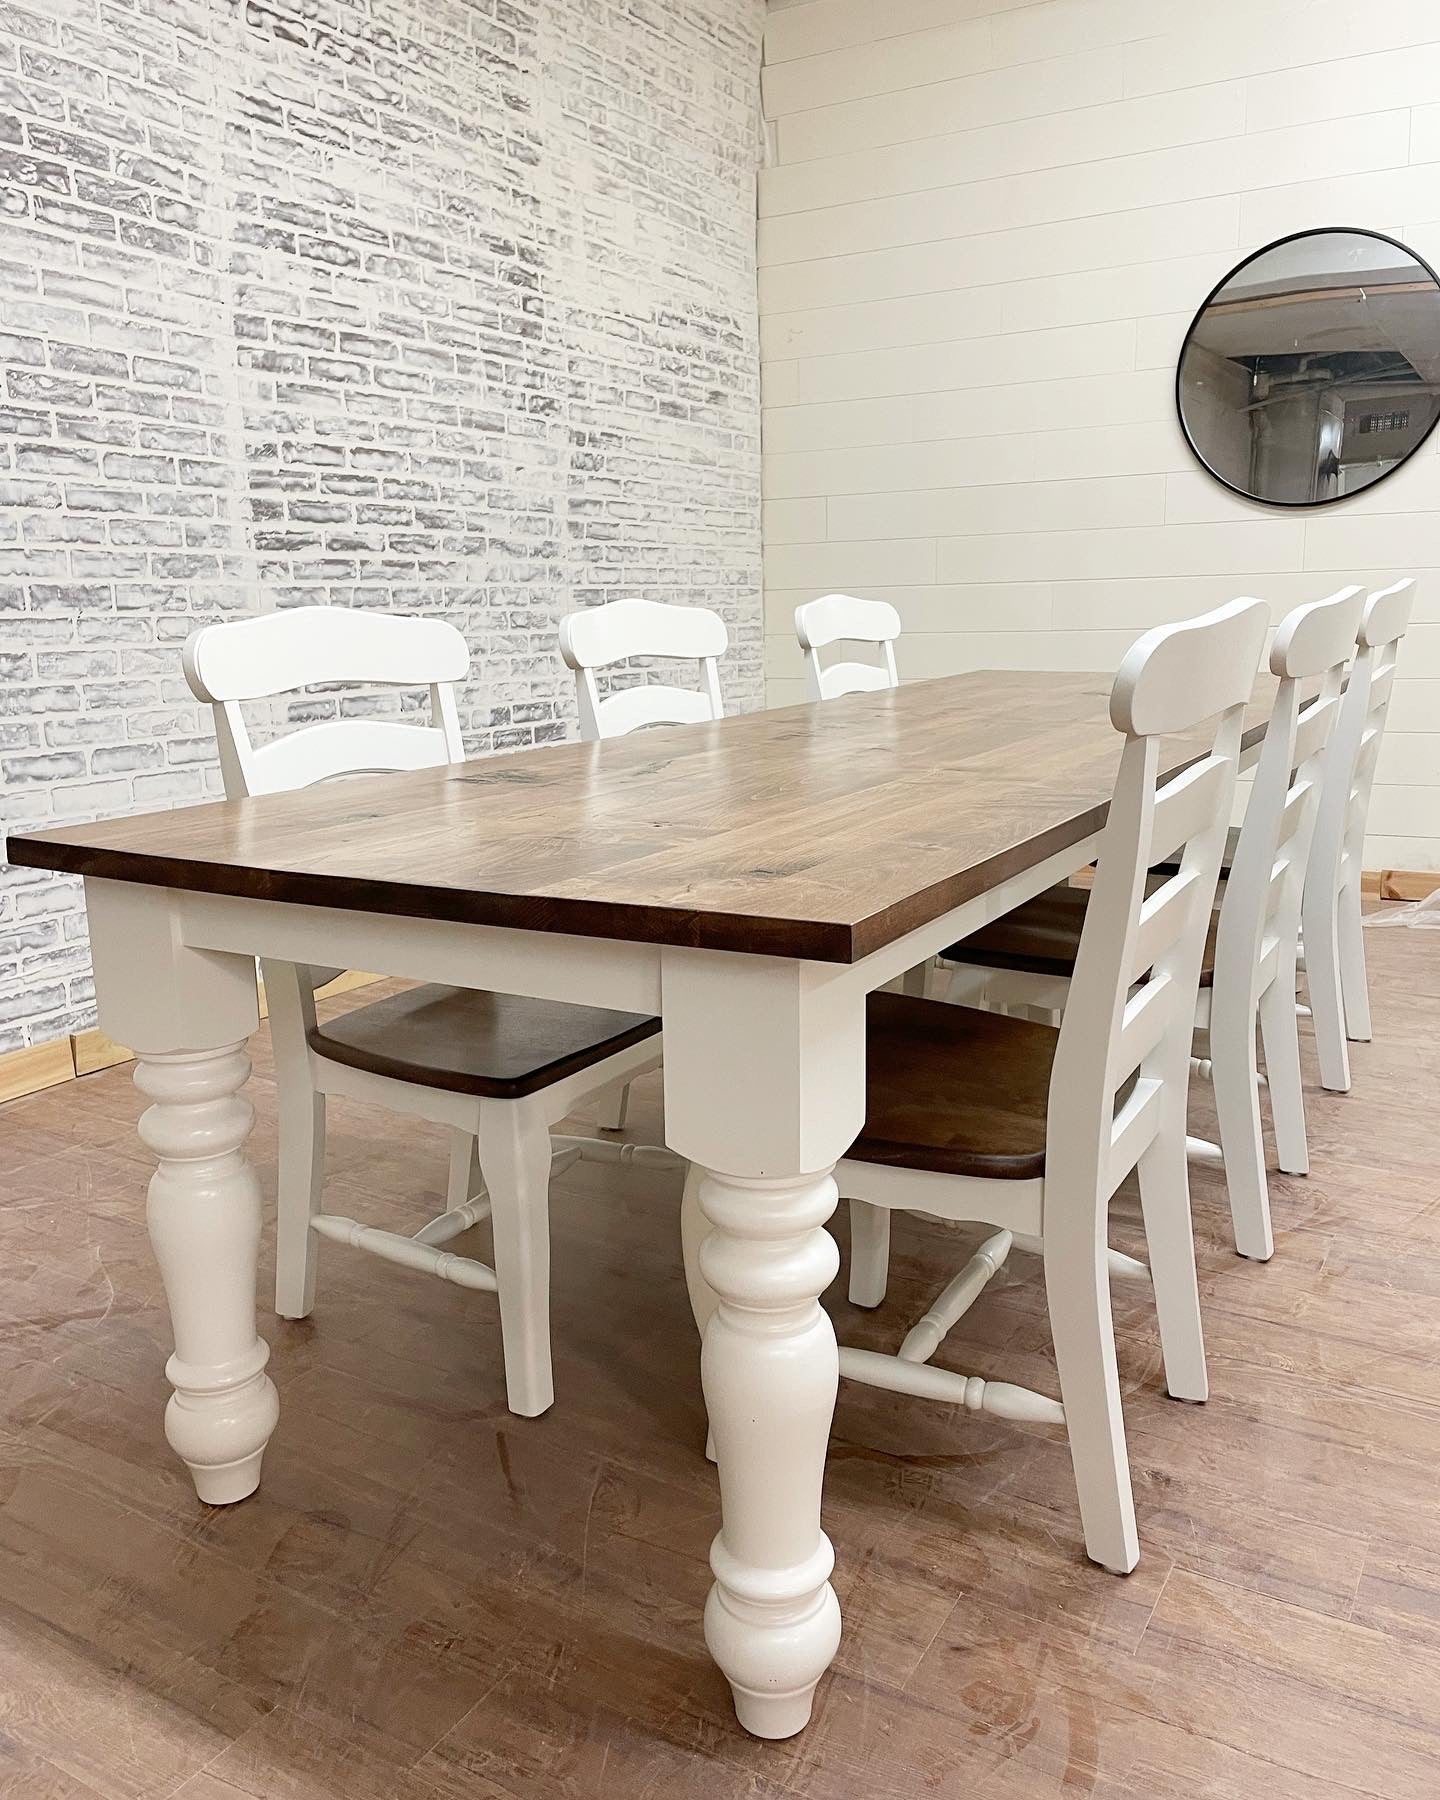 Pictured with a 9'L x 42"W Maple top stained Honey and a painted White base. Pictured with 6 French Country Chairs.